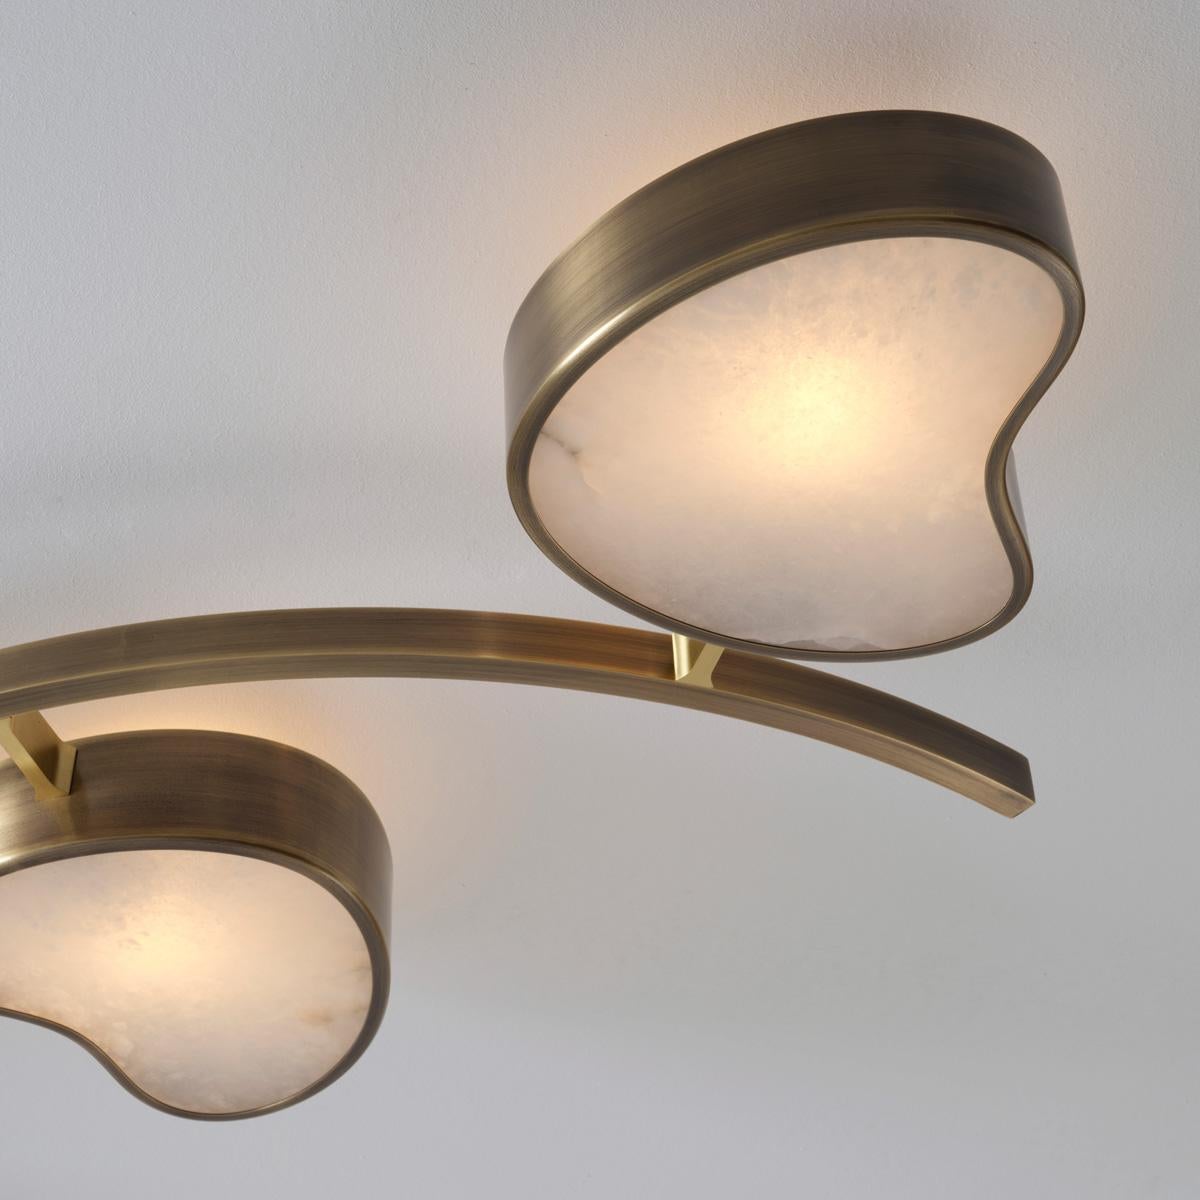 Cuore N.6 Ceiling Light by Gaspare Asaro. Peltro and Bronze Finish For Sale 5